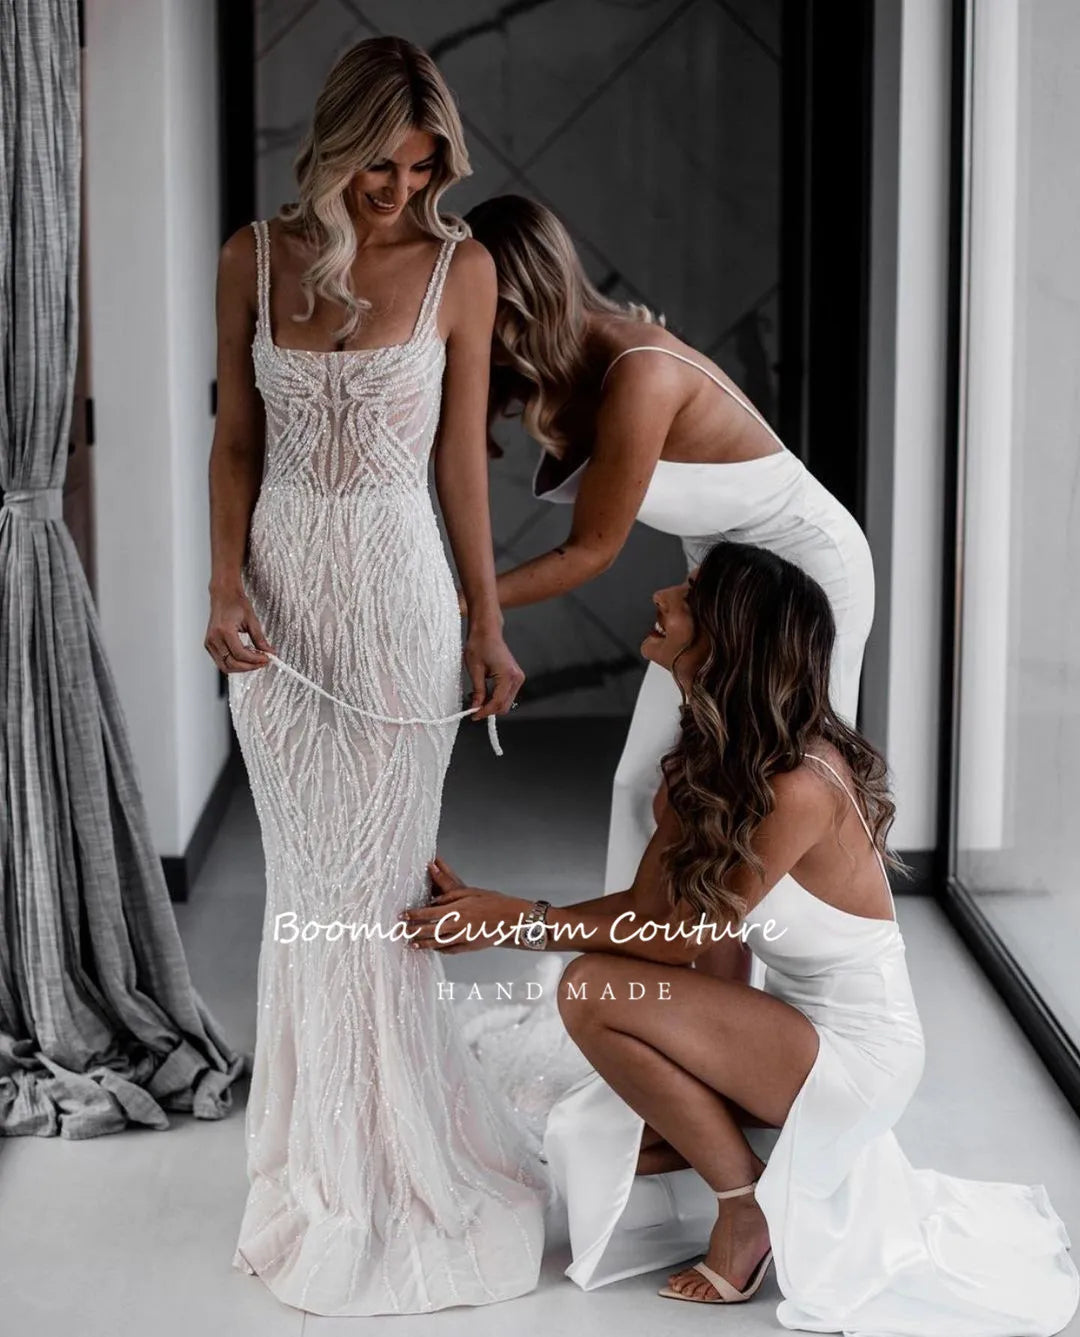 Glitter Tulle Mermaid Wedding Dresses Spaghetti Straps Square Neck Fitted Bridal Gowns Backless Bride Dresses